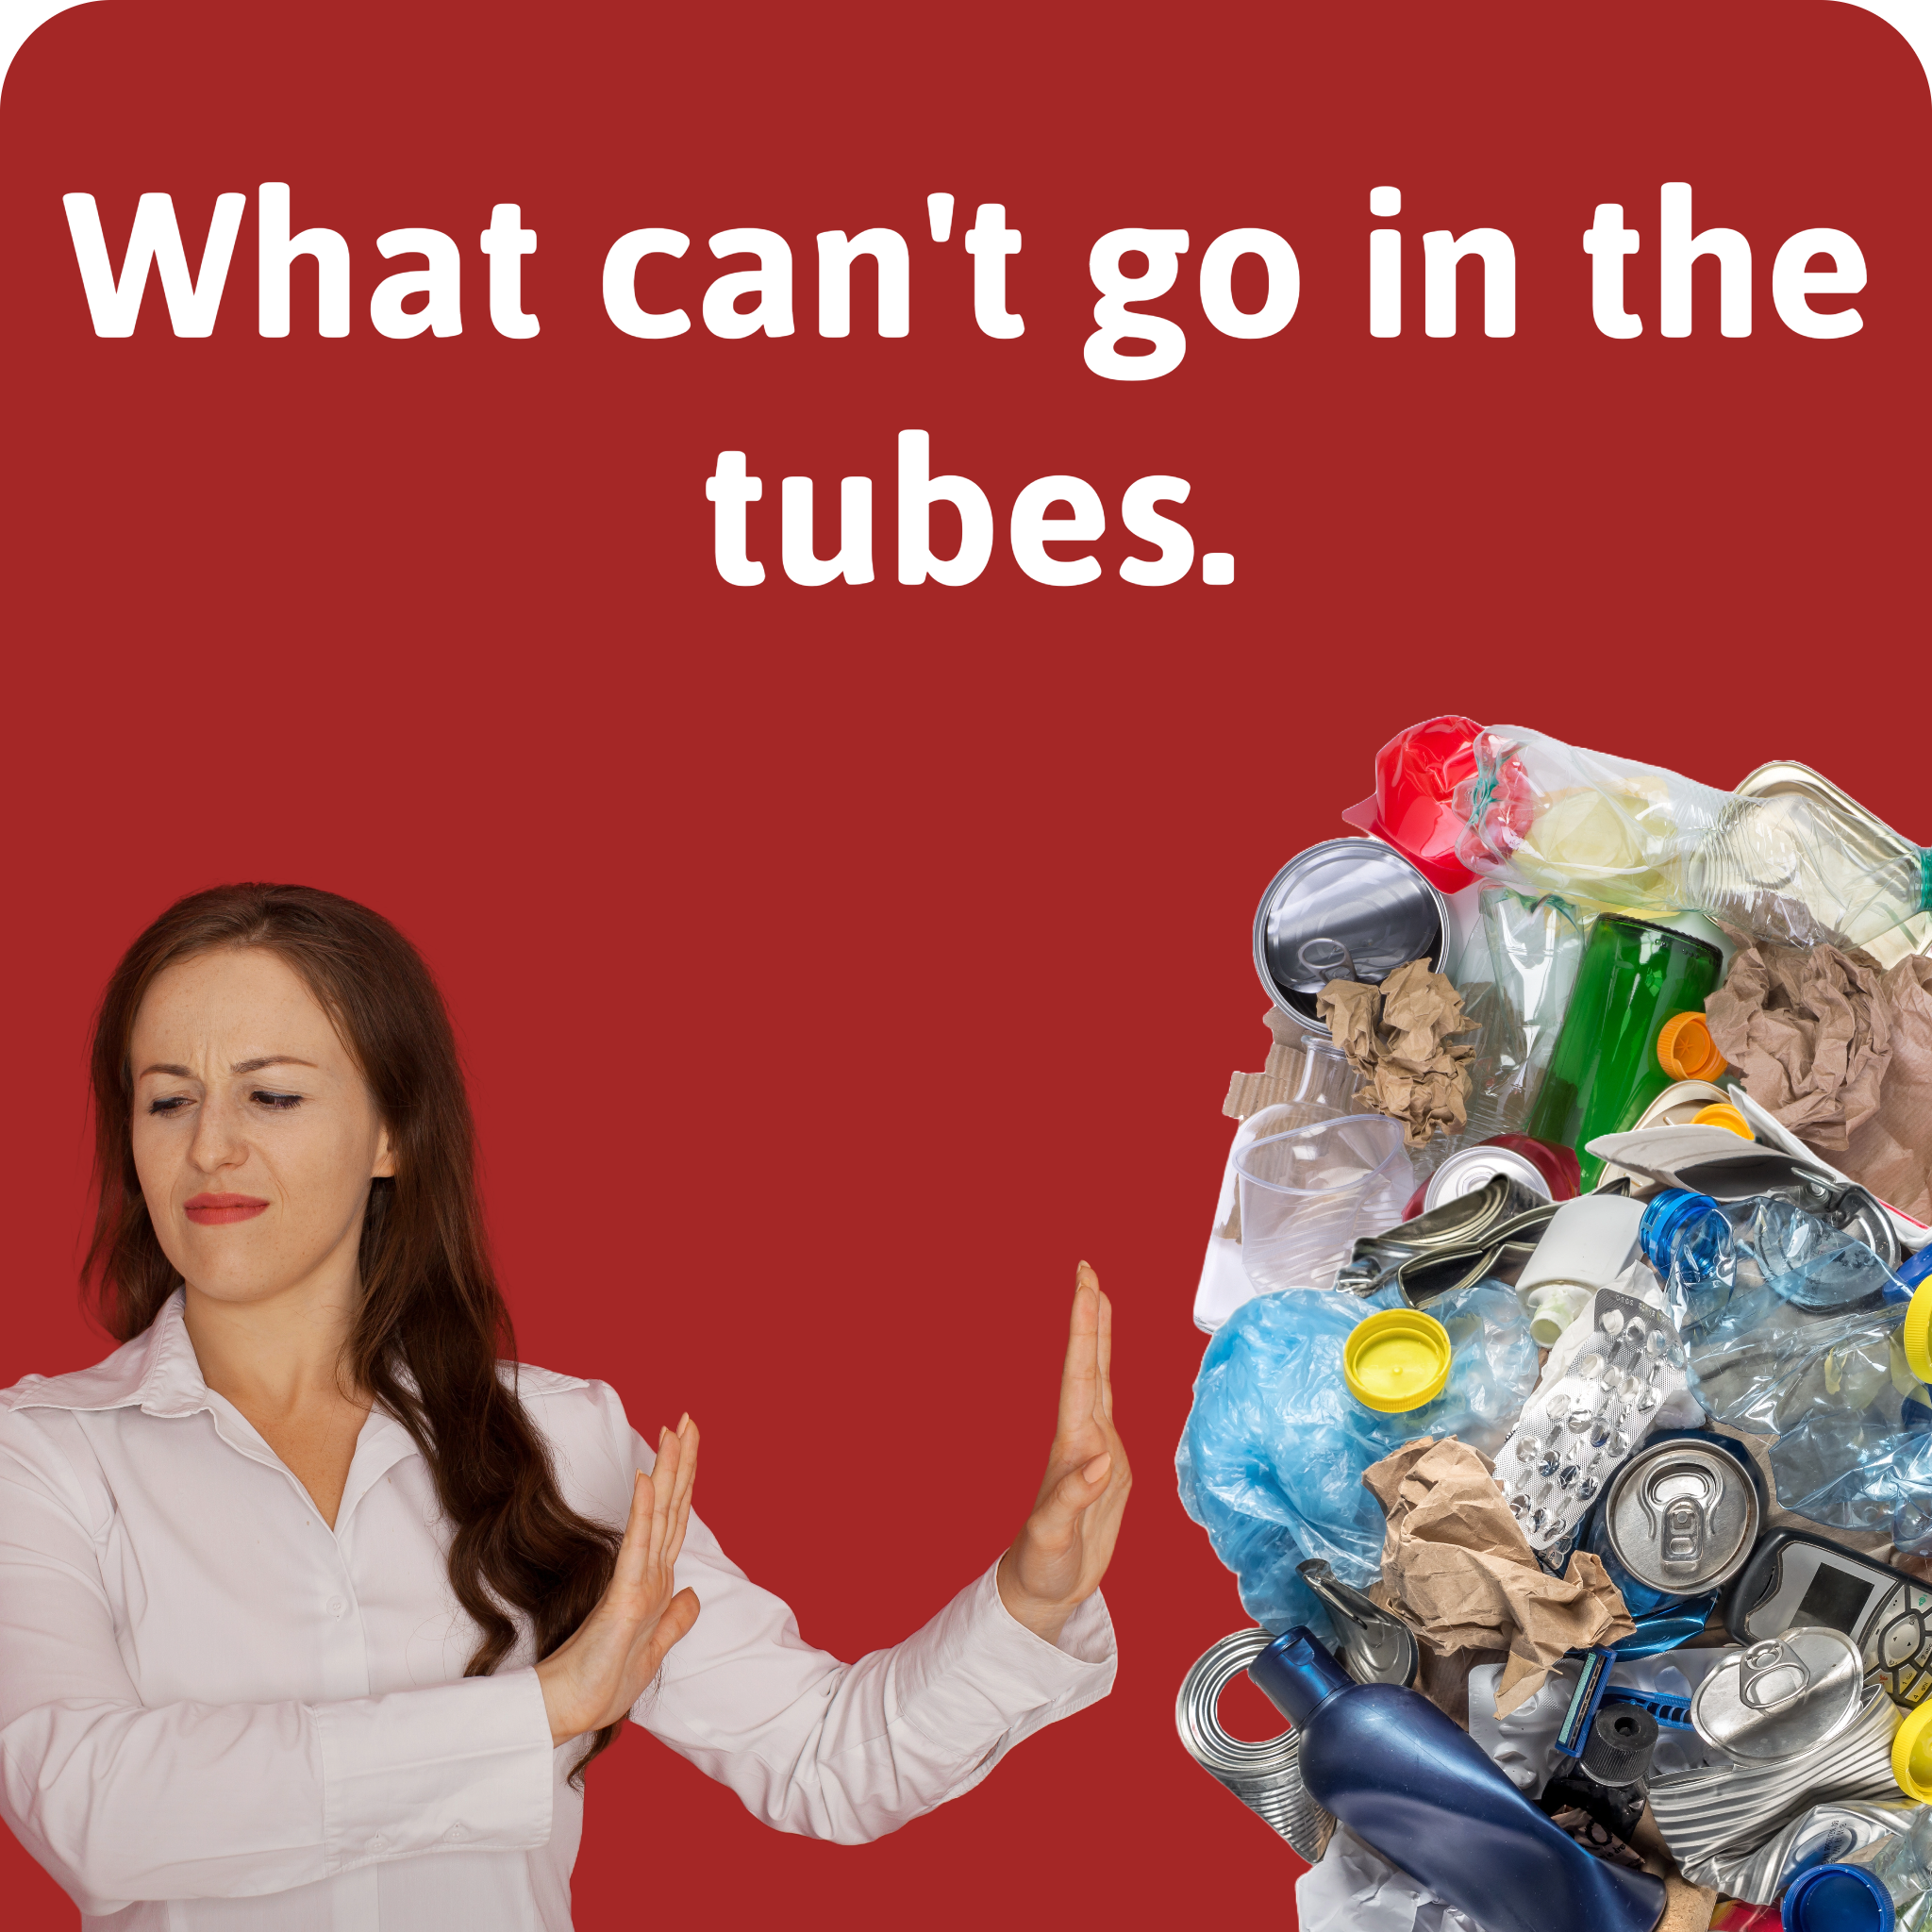 What can't go into the tubes is the text on this image. The text is white over a red background. There is a woman to the left in disgust holding her hand blocking her from a garbage pile on the right.